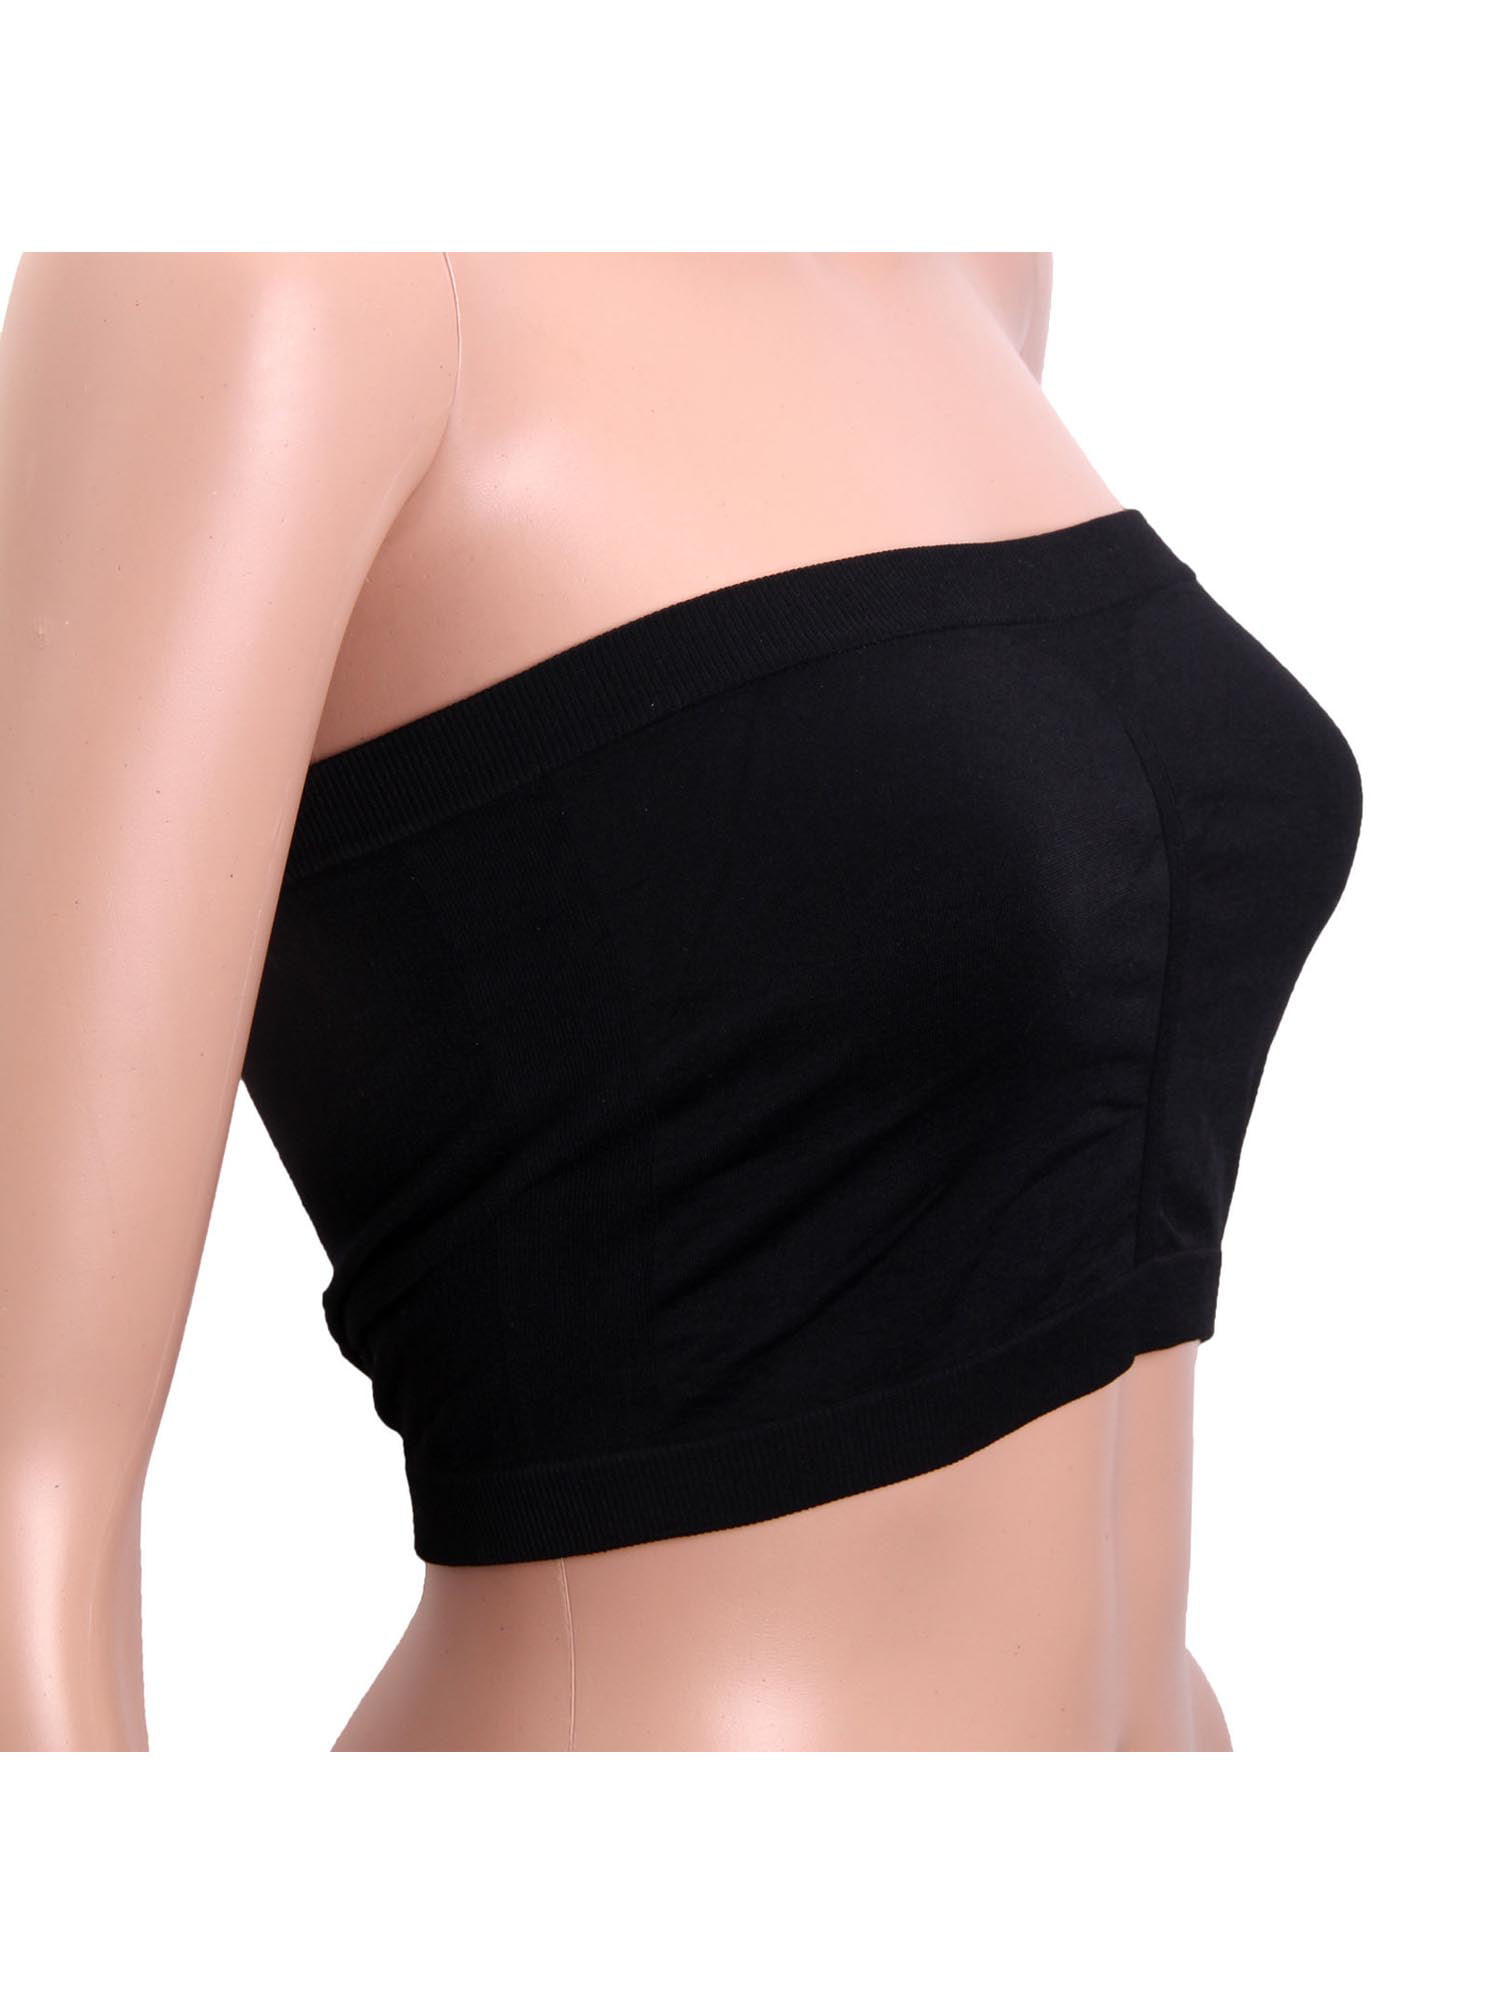 6 Packs of Mamia Bandeau Bra Strapless Off Shoulder Padded Tube Top Spots Bra